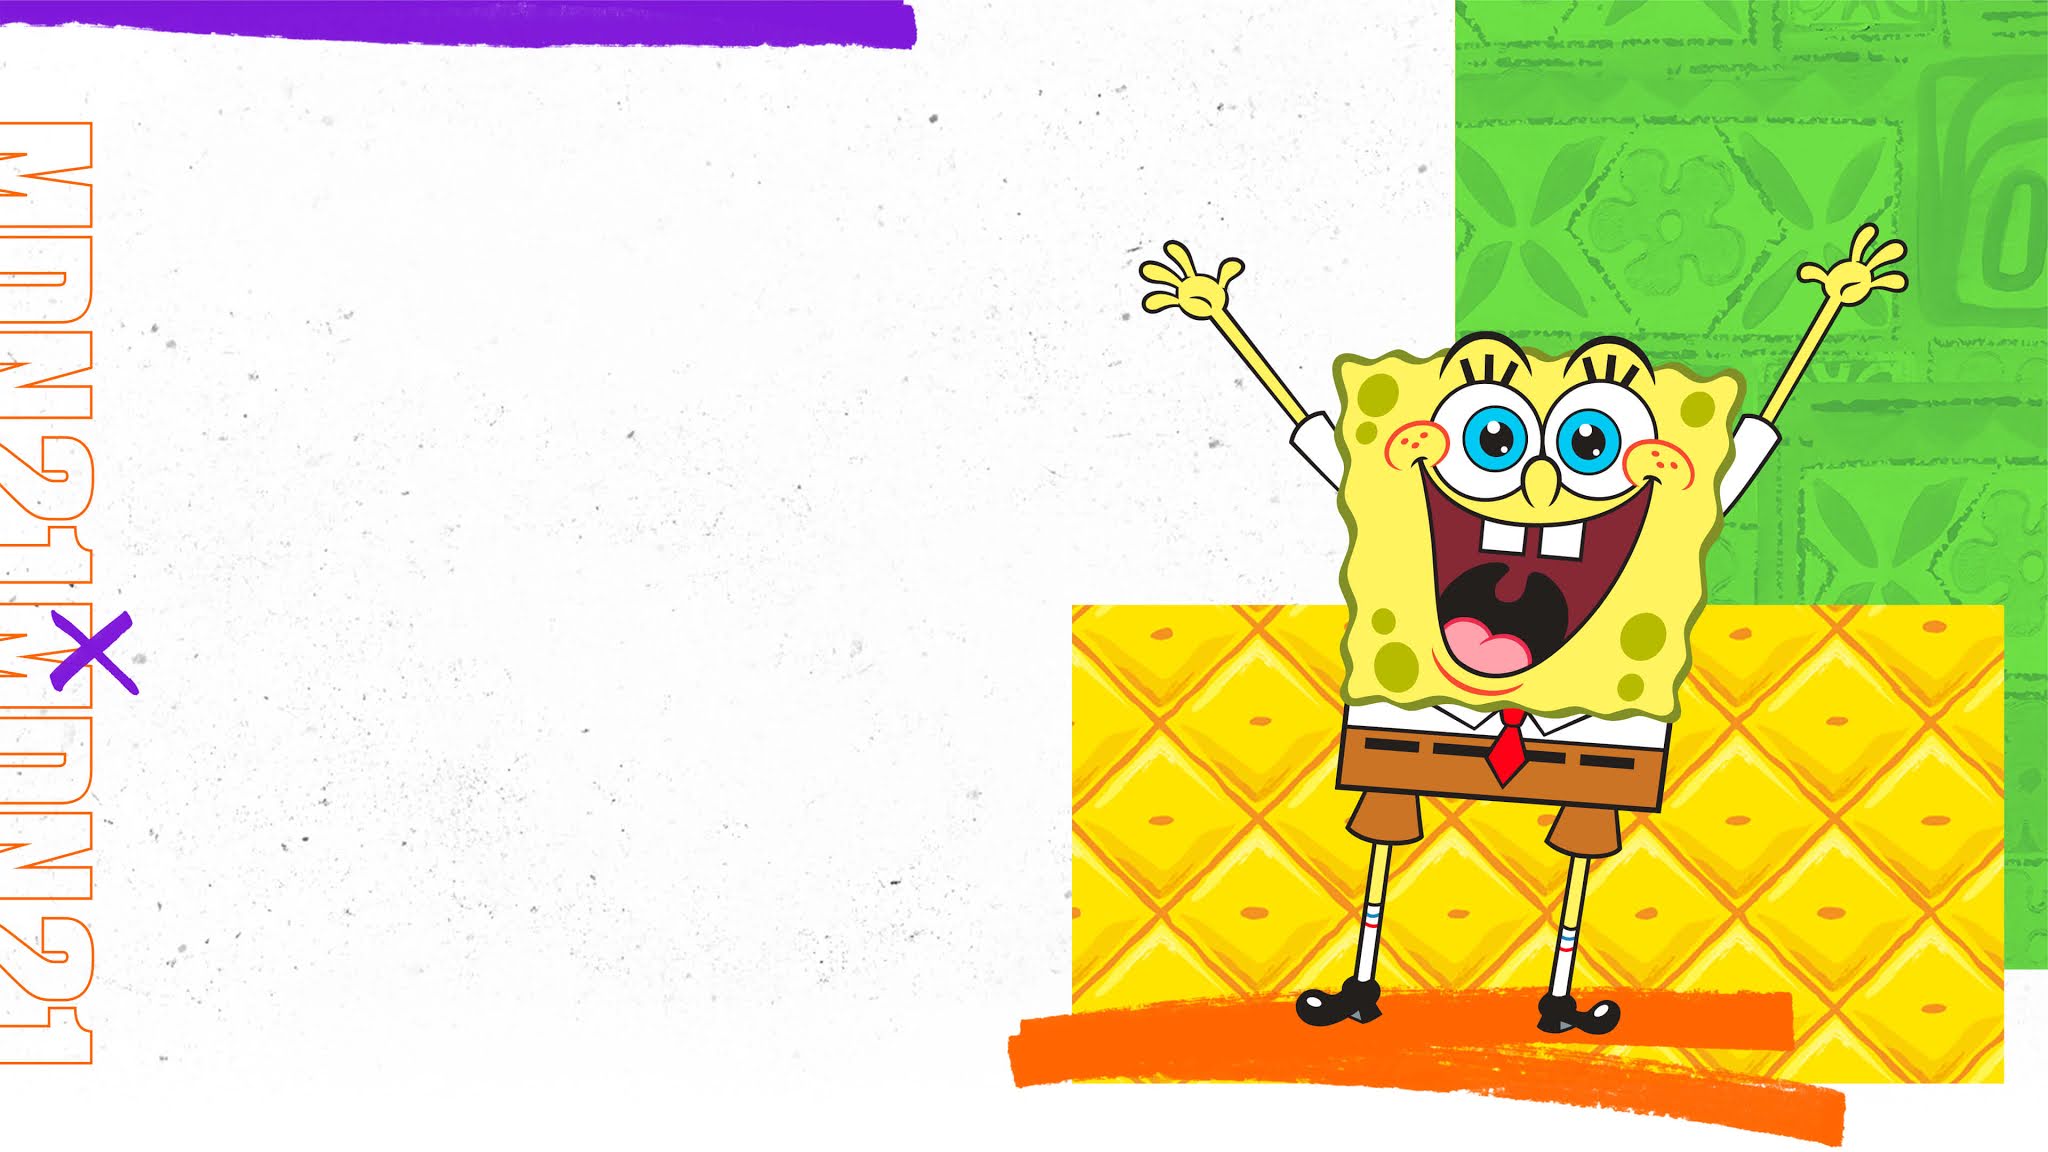 SpongeBob, slime, football: Nickelodeon ready for its NFL moment